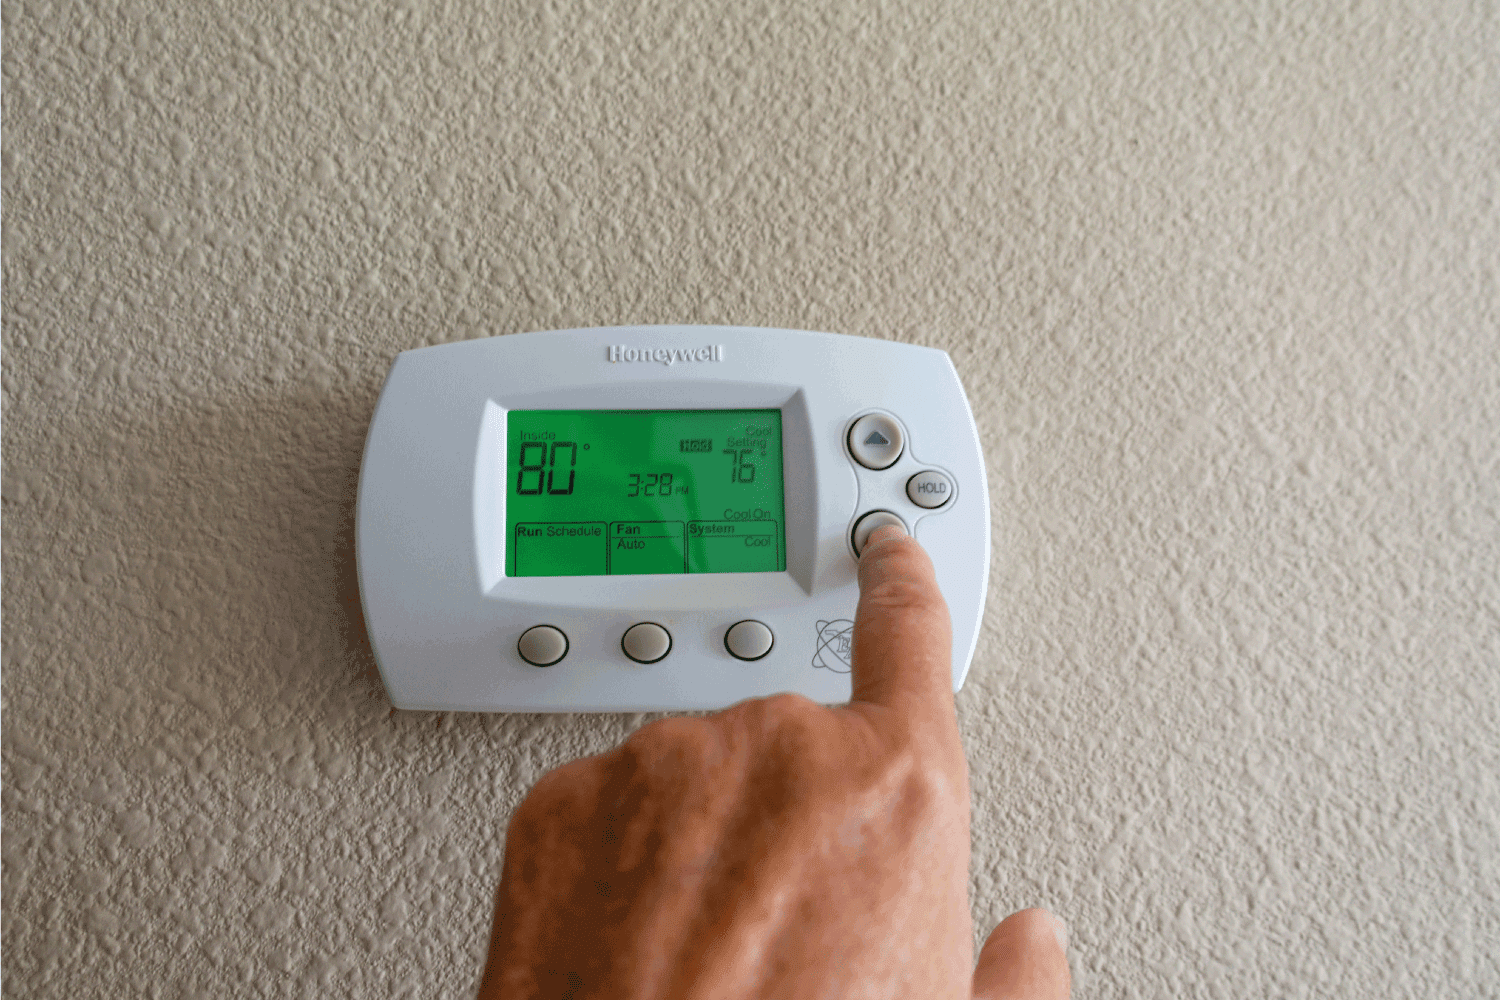 Honeywell programmable thermostat to control the air conditioner and heater in a home.